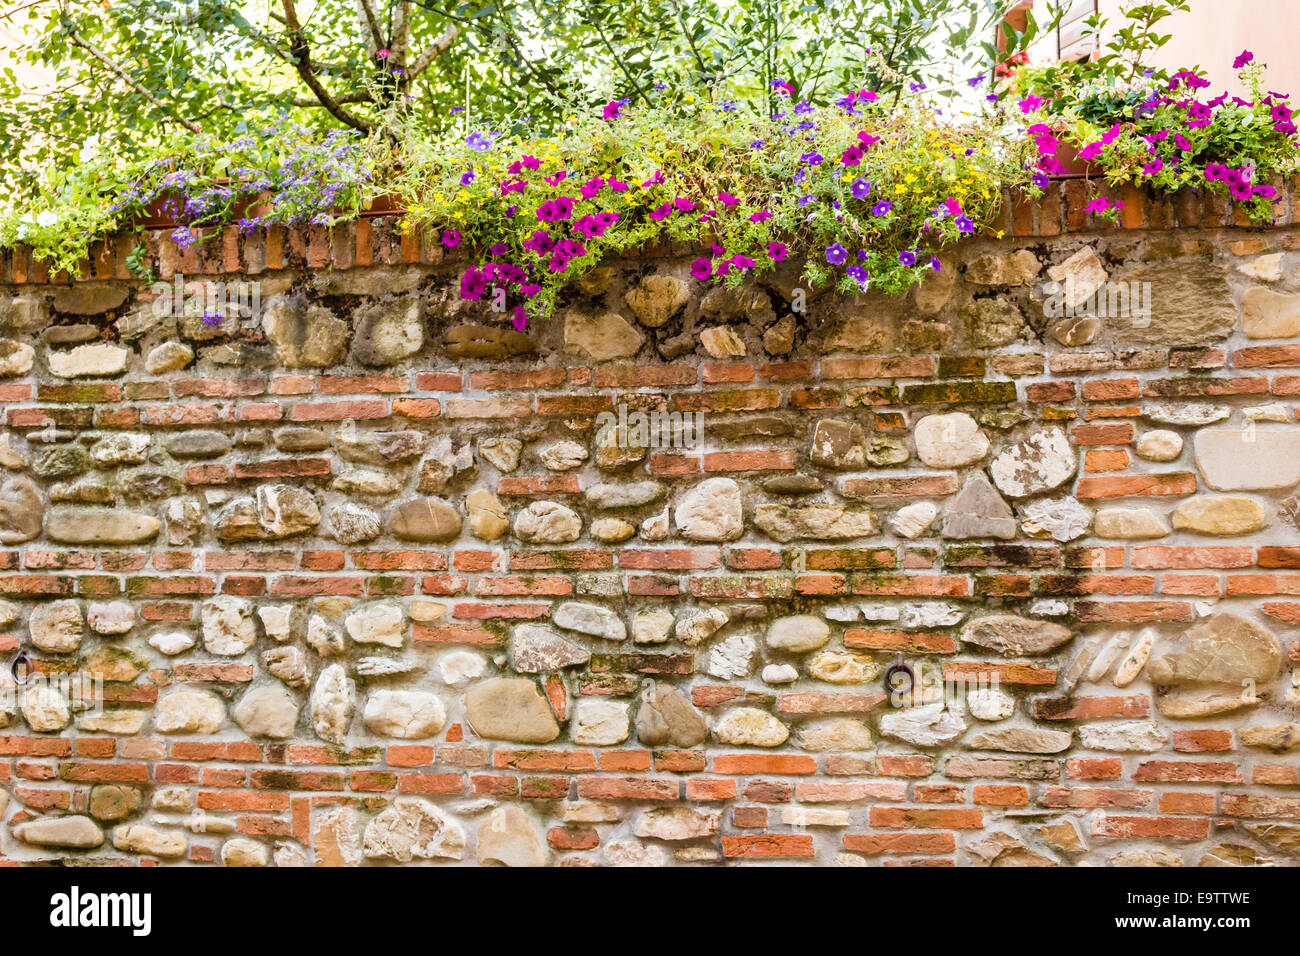 hanging down flowers on the medieval brick walls of the small village of Dozza near Bologna in Emilia Romagna, Italy Stock Photo